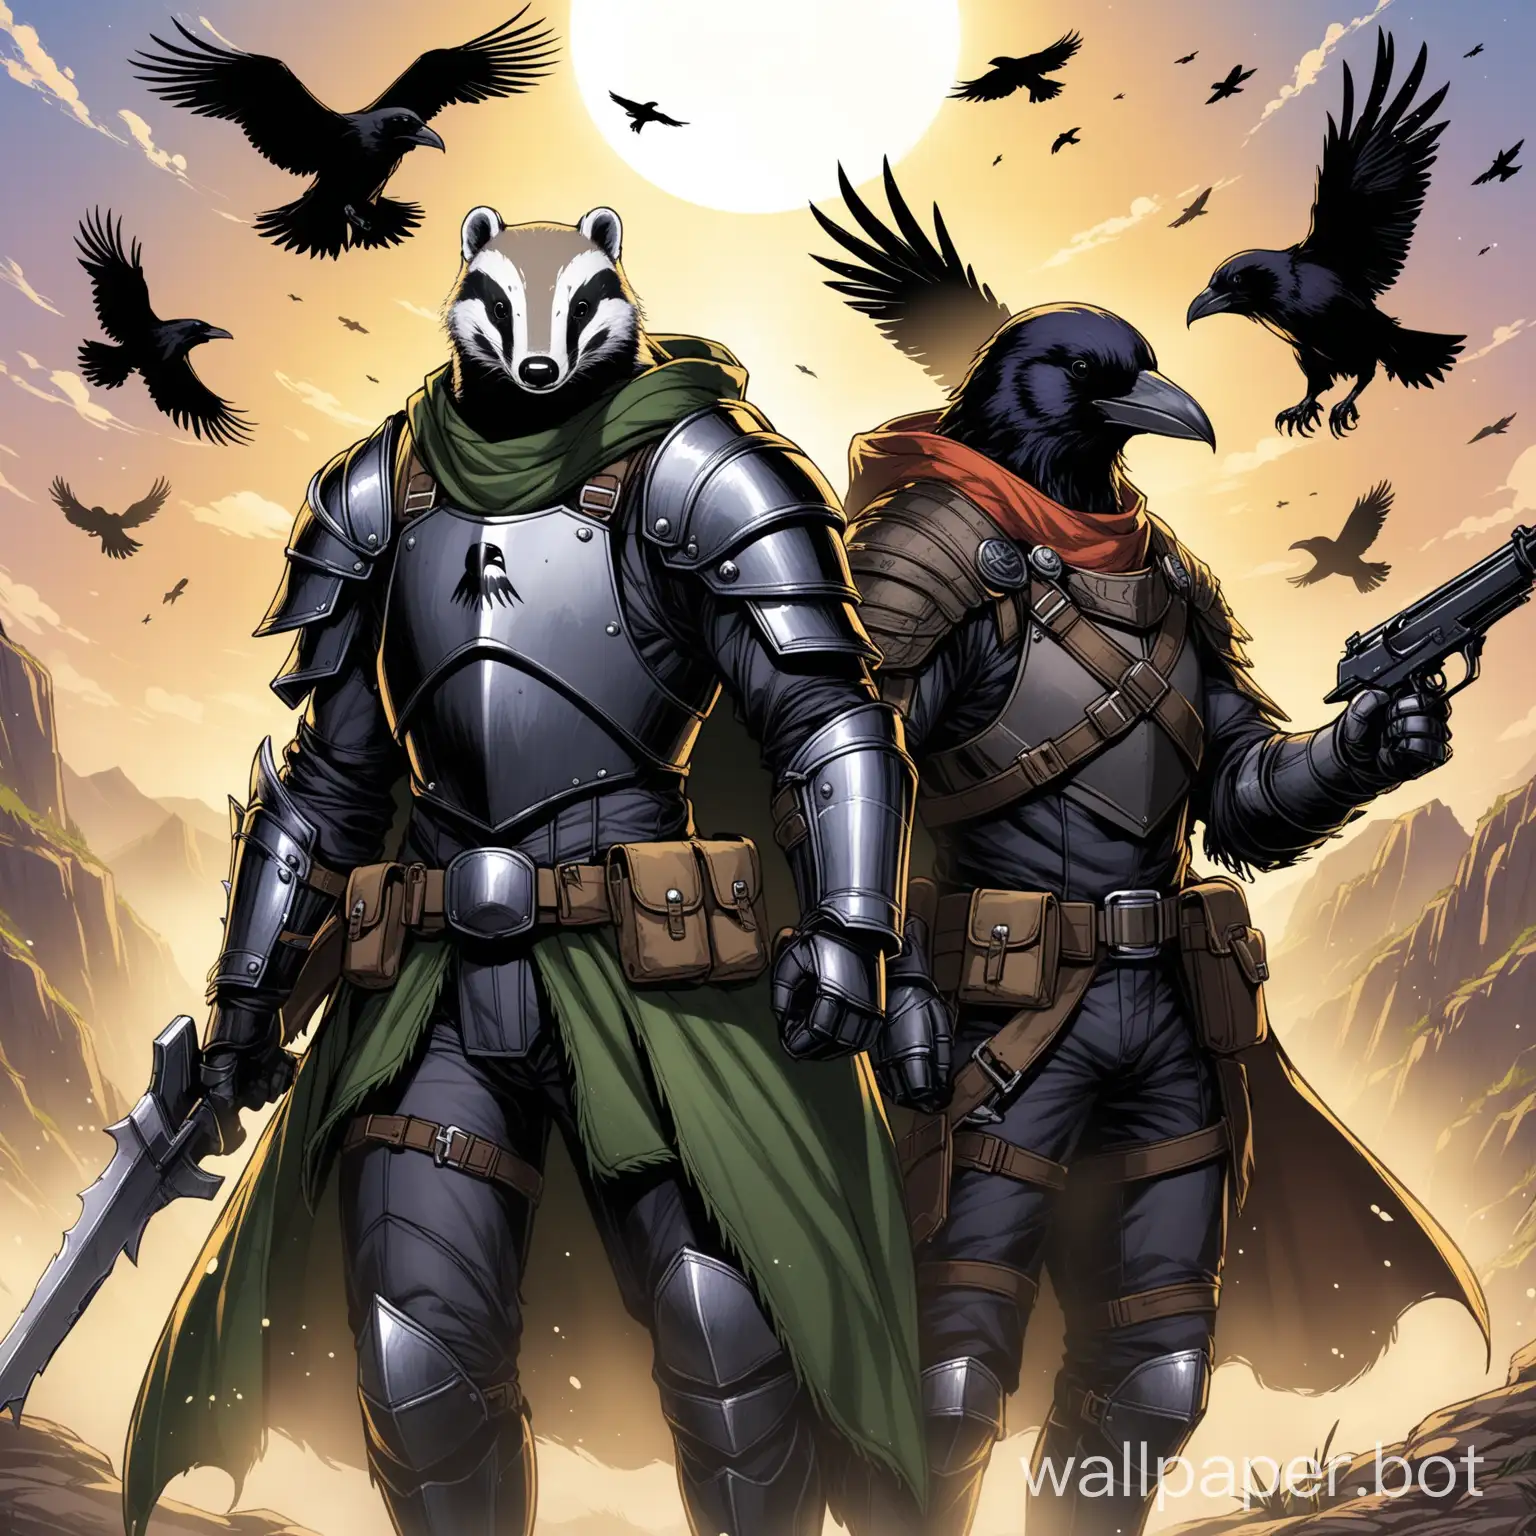 American Badger Knight and Raven Ranger